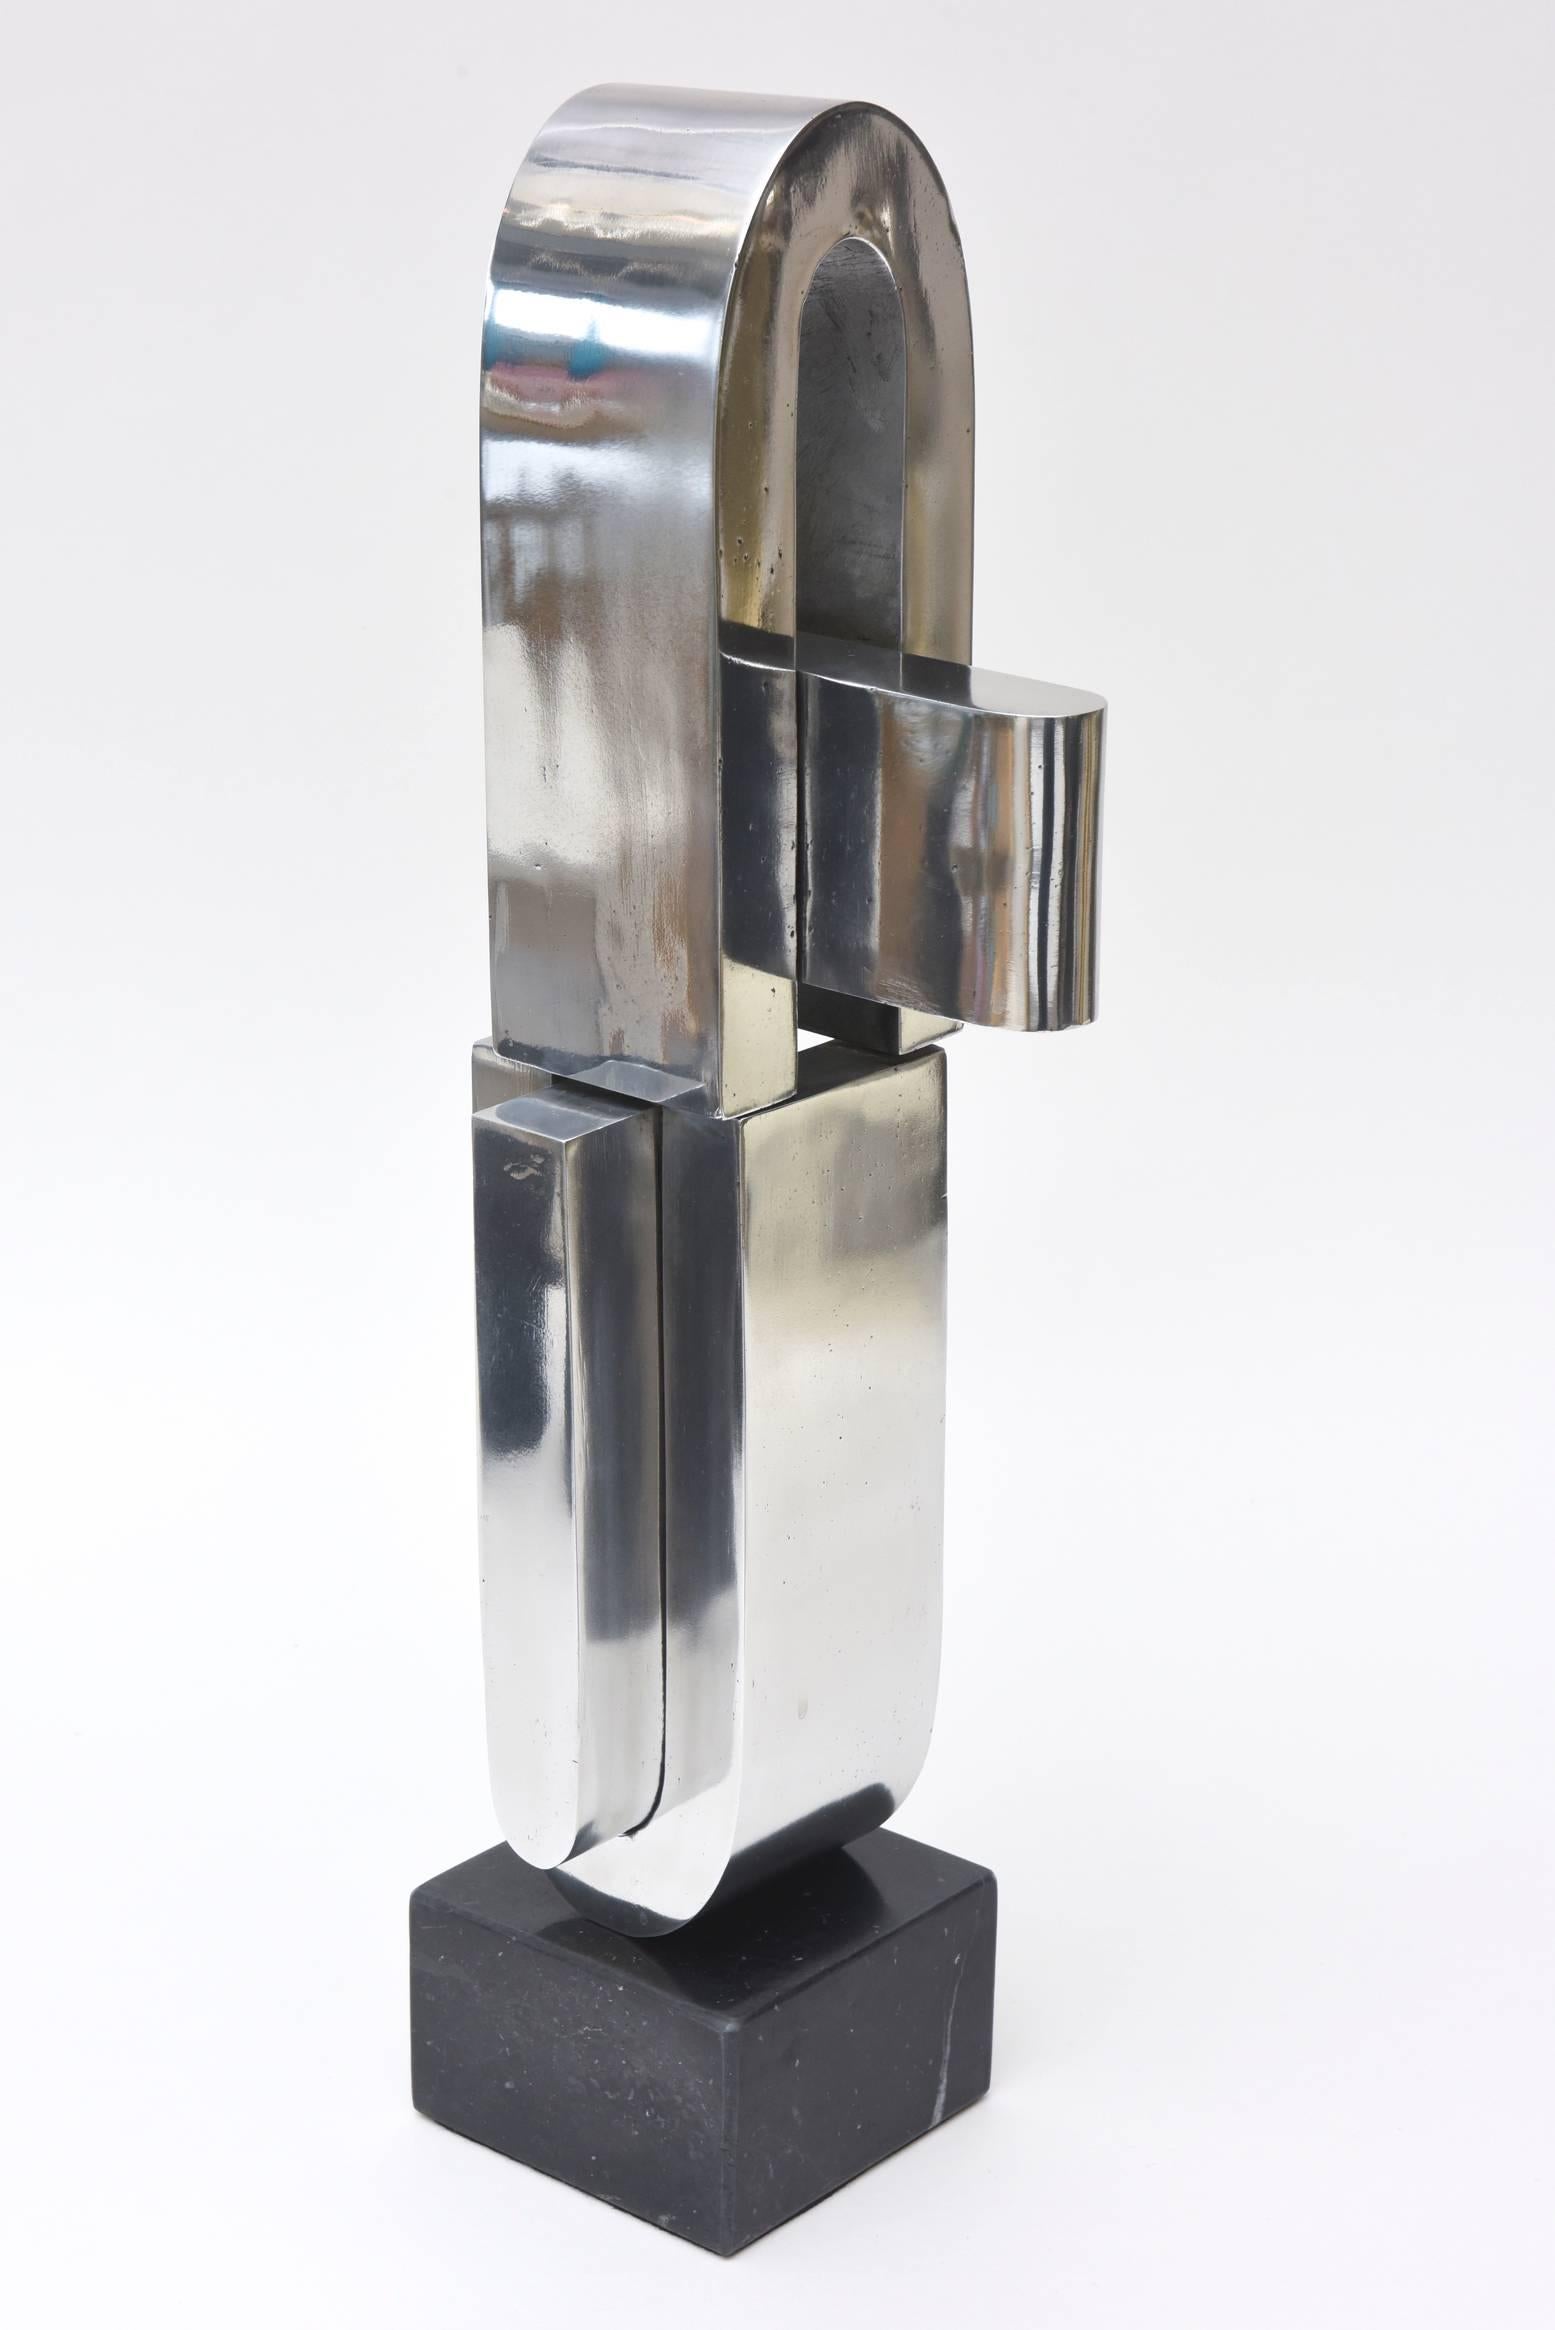 This fabulous vintage double U-shaped abstract sculpture by the noted artist Mary Preminger is so modernist. It is chrome on a black marble original base. It was executed in 1968. It is unsigned though but definitely her work. It is believed to be